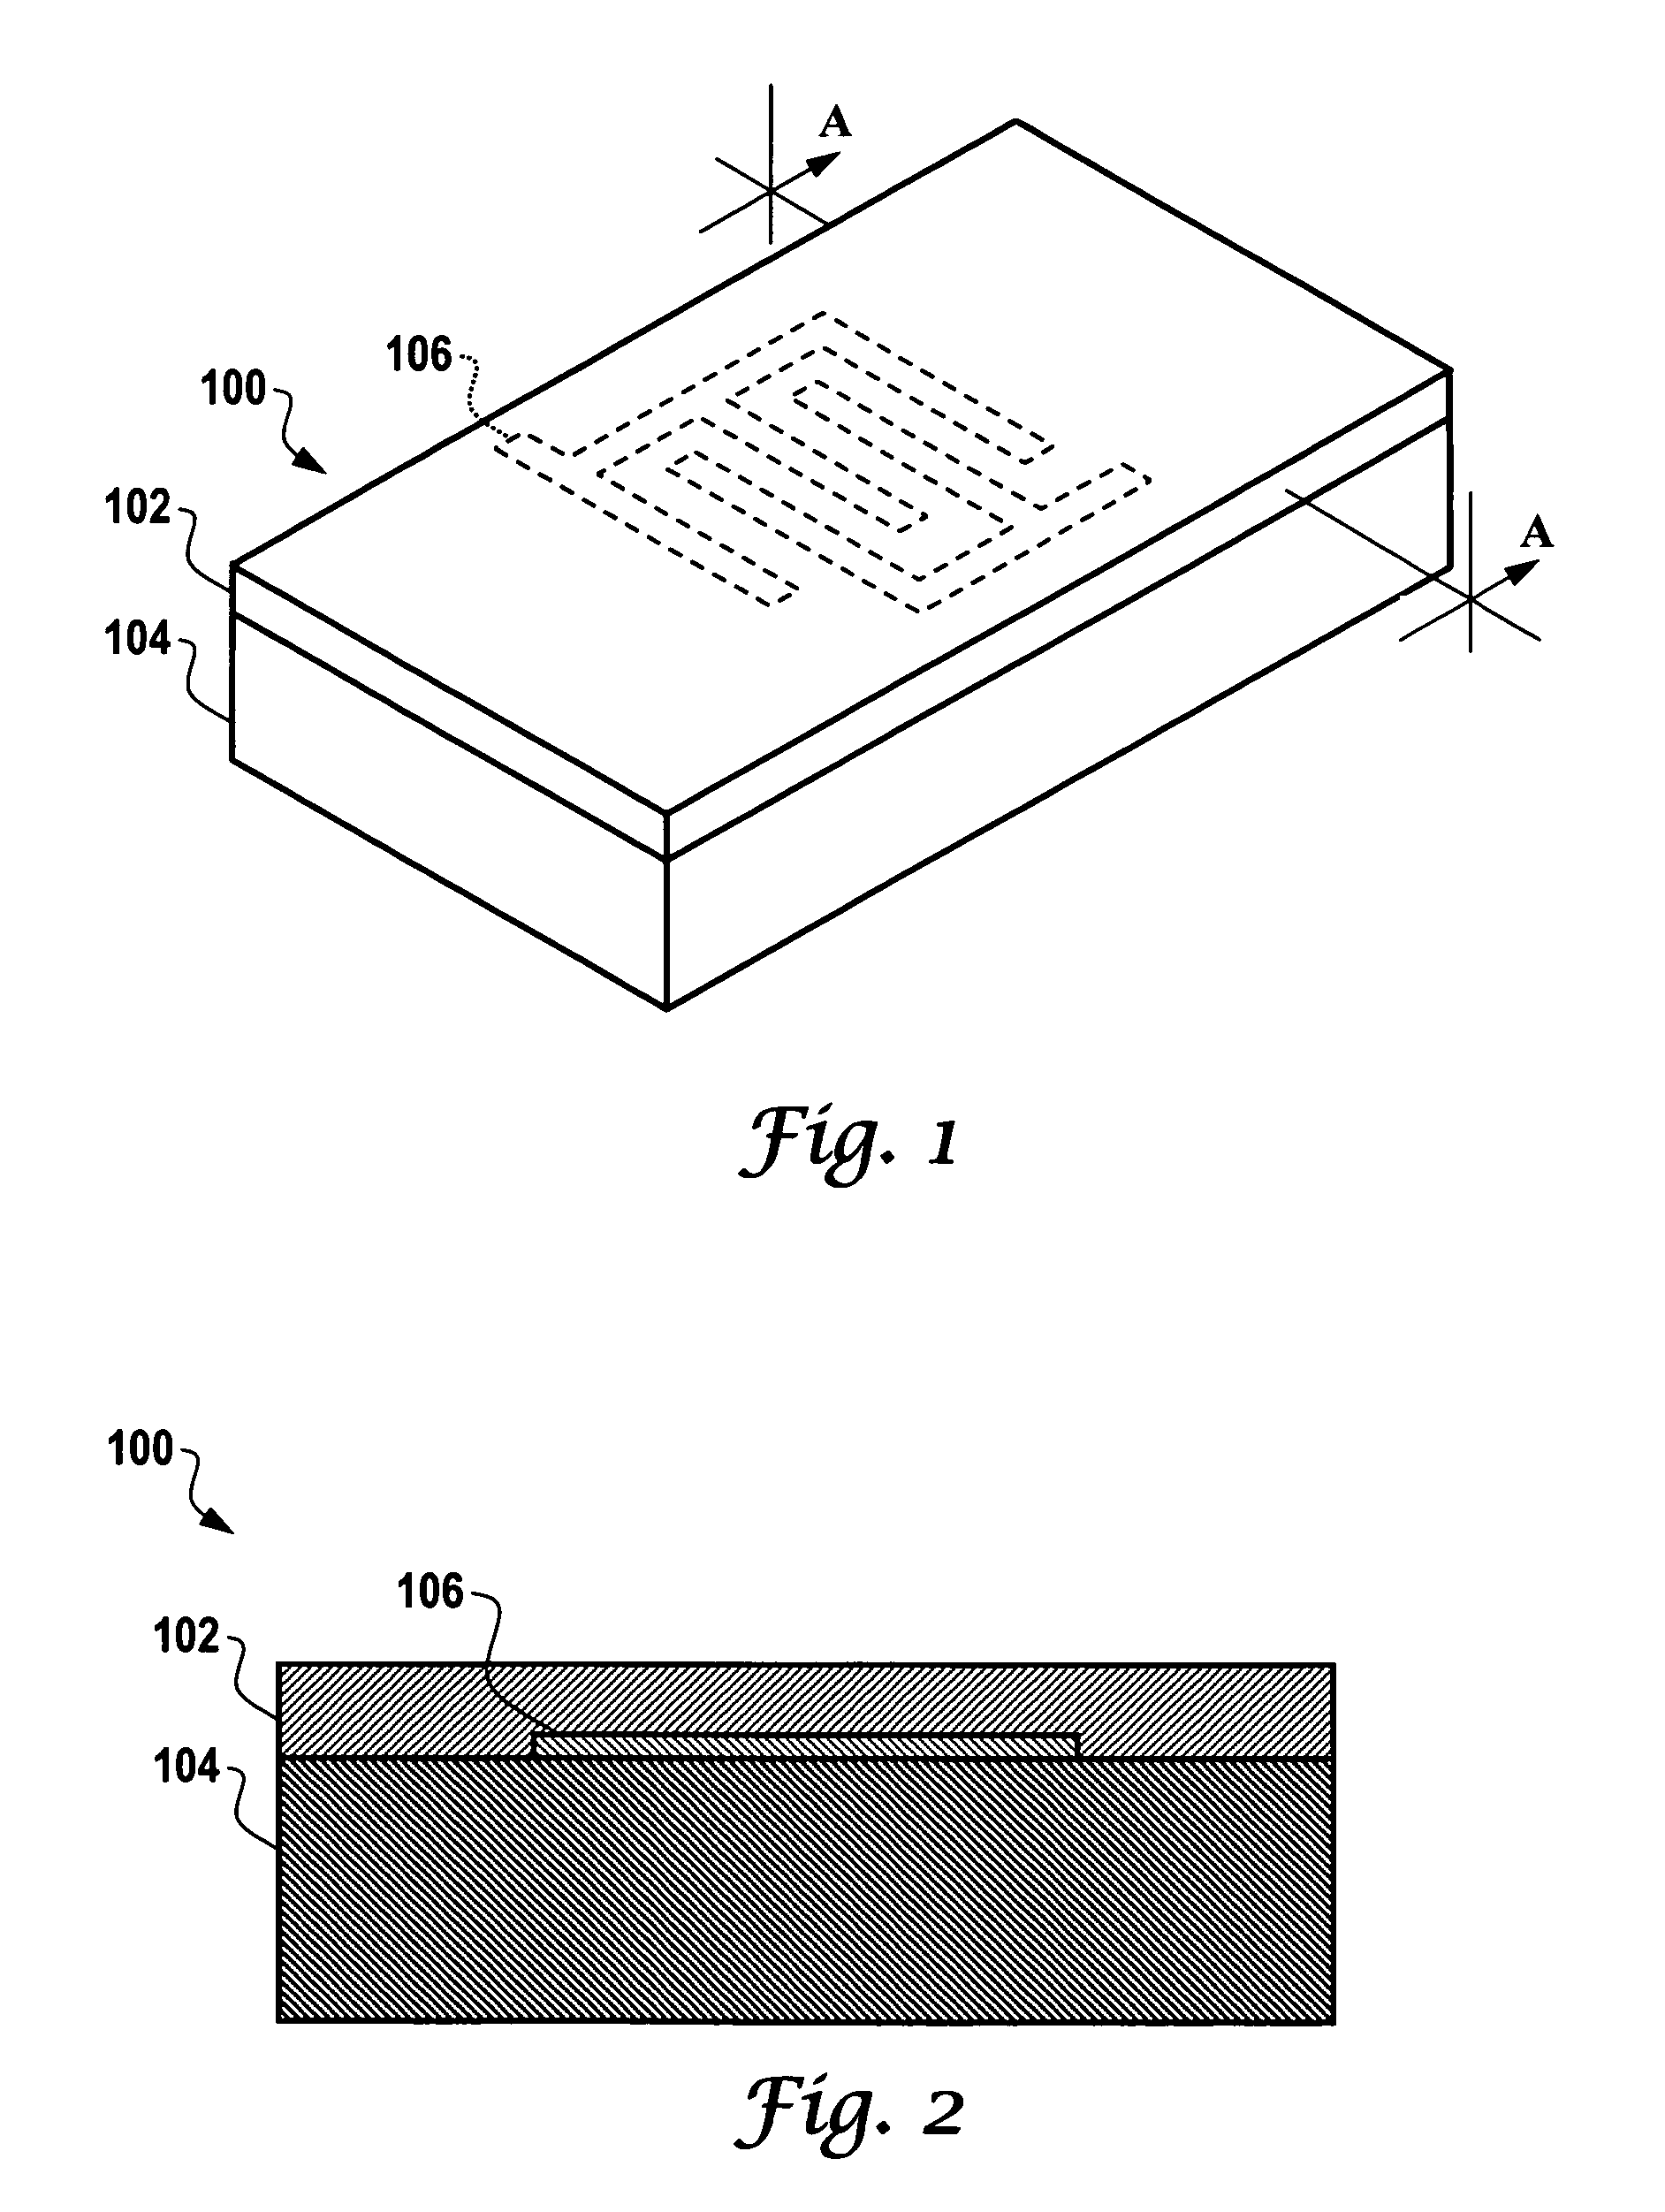 Method of making a surface acoustic wave device